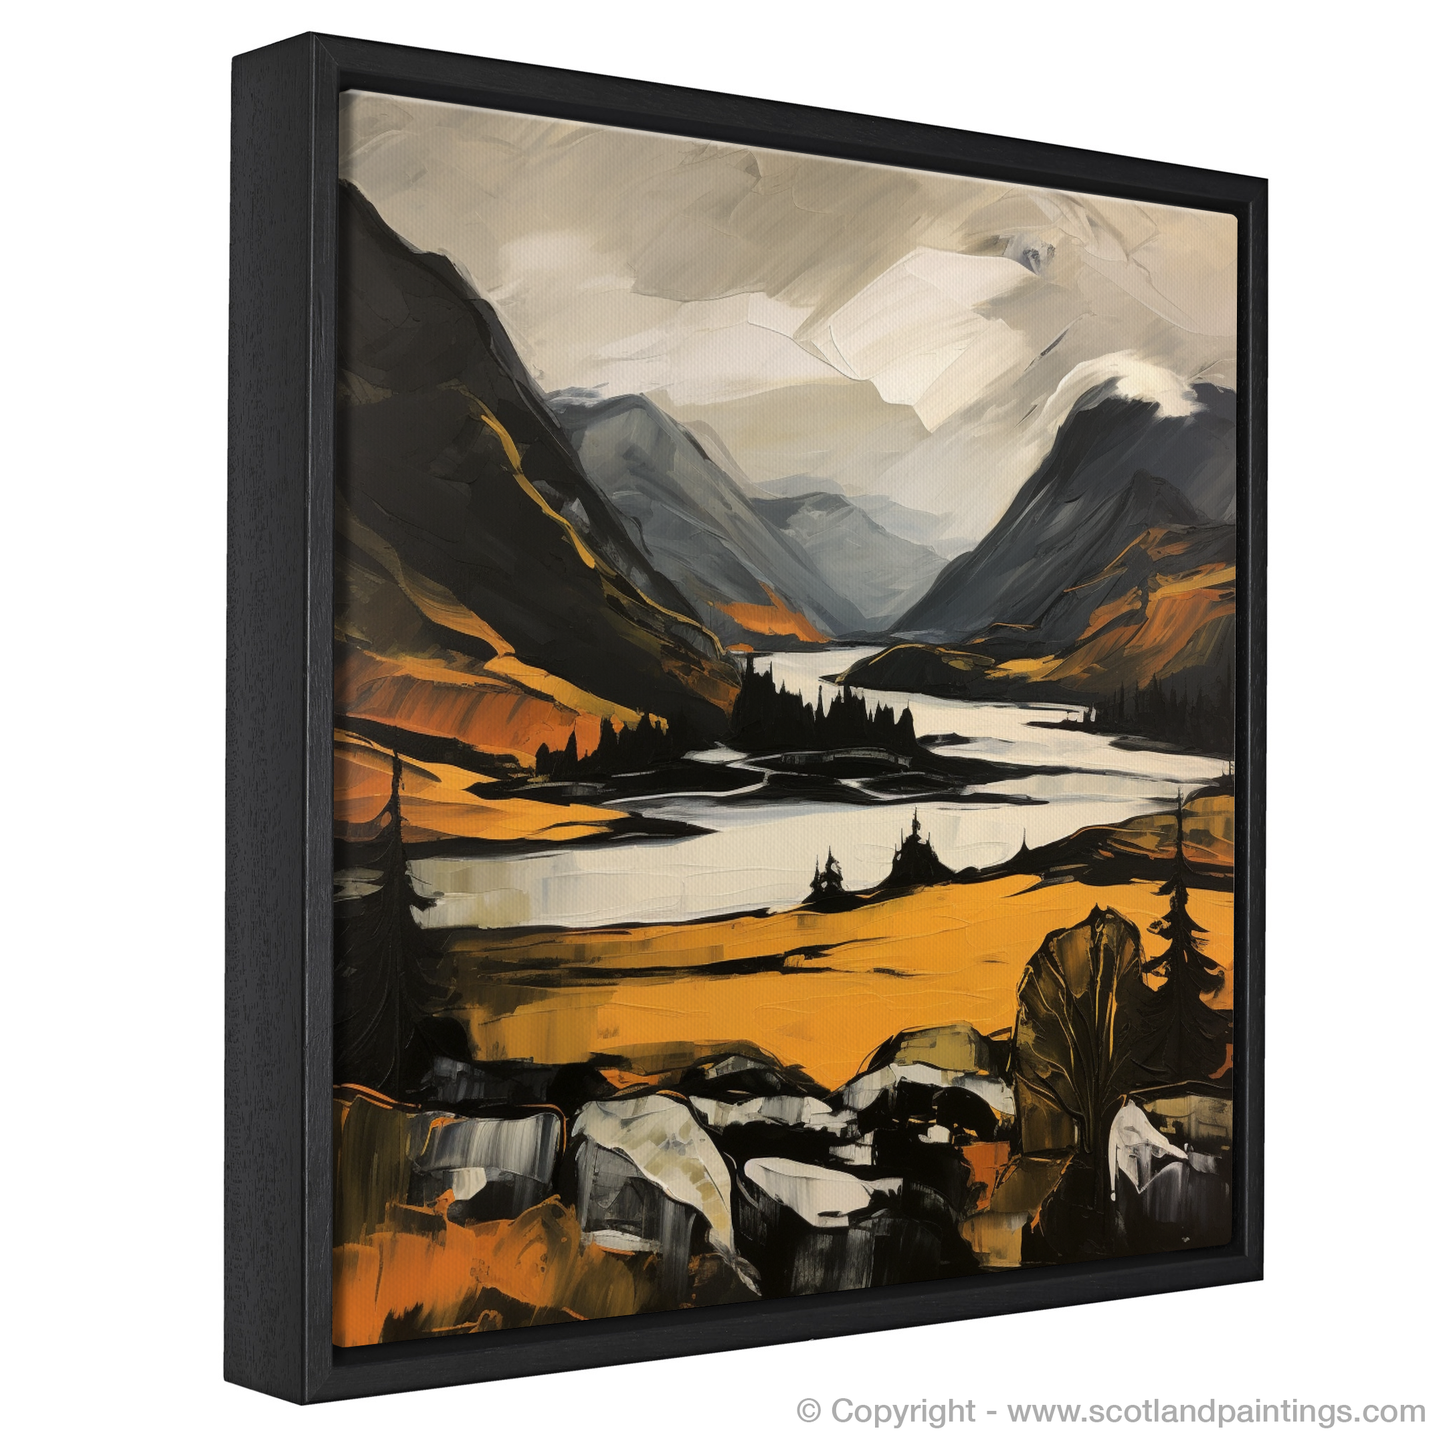 Painting and Art Print of Glenfinnan, Highlands entitled "Glenfinnan Highlands Captured in Expressionist Embrace".